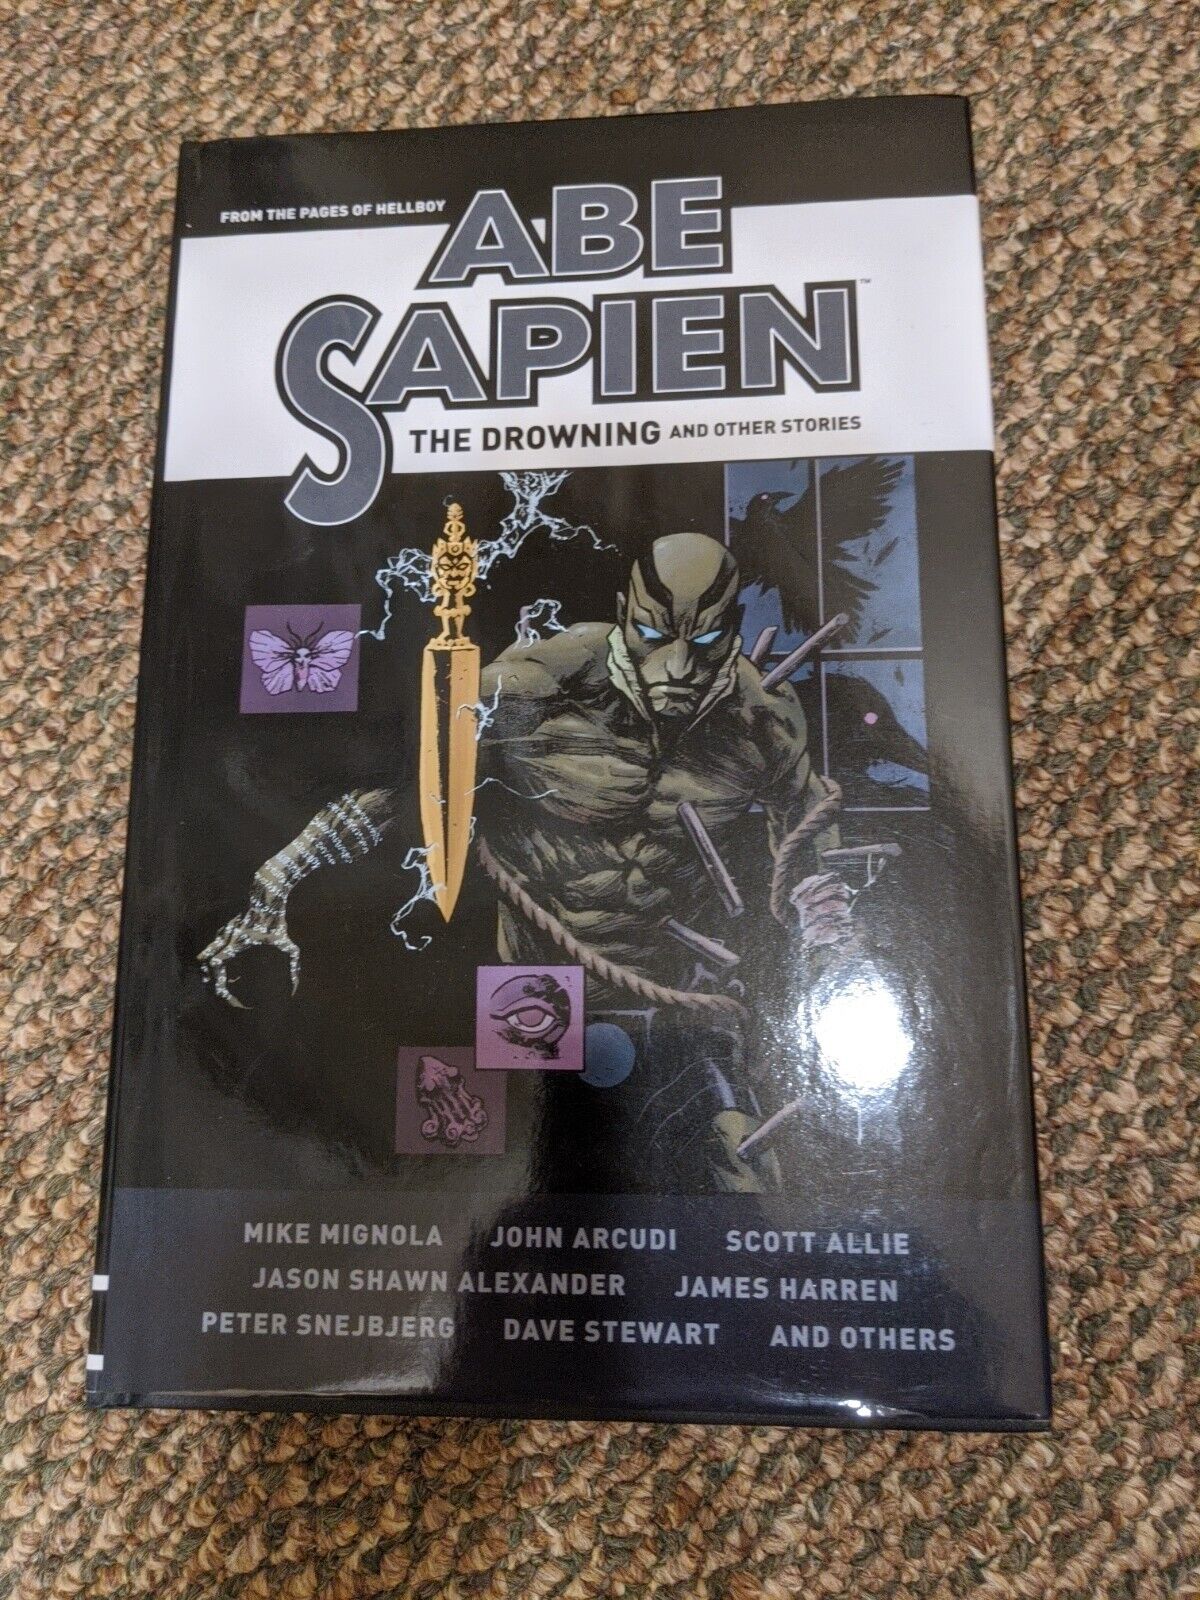 Abe Sapien: The Drowning and Other Stories (Dark Horse Comics, July 2018)